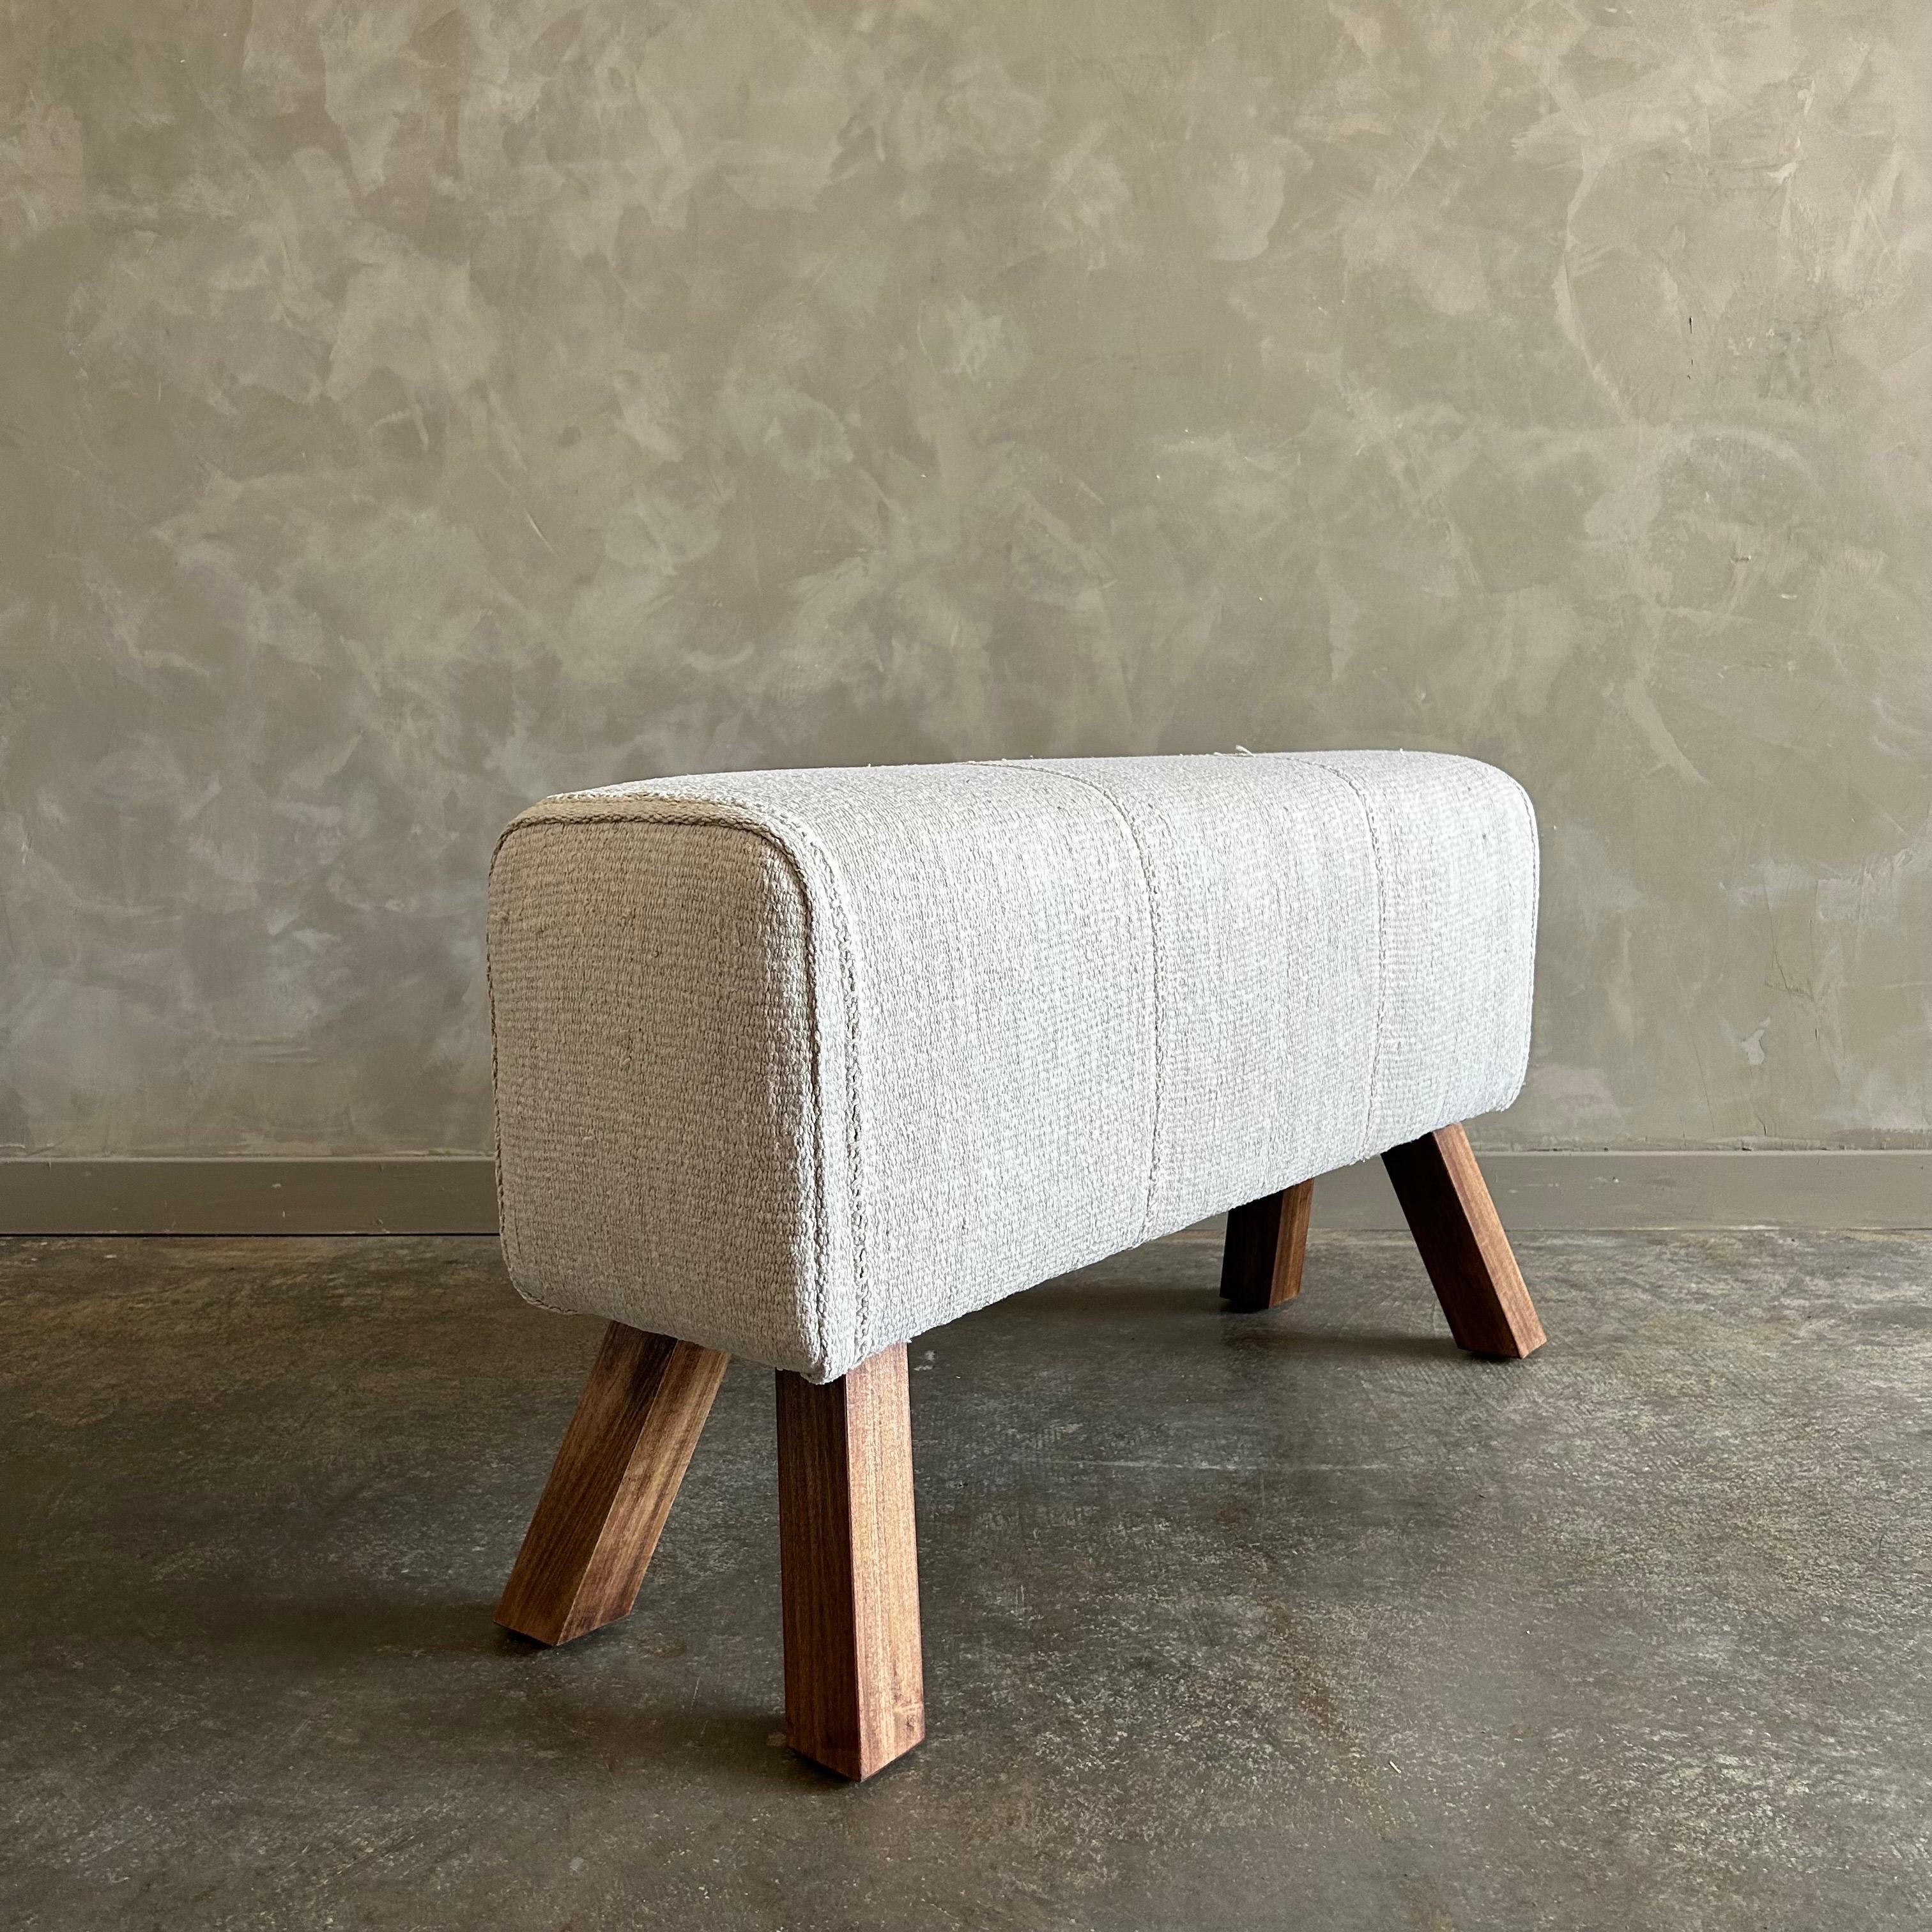 Pommel horse 40”w x 13”d x 22”h
Custom made from a vintage hemp rug, in an oyster white color.
The legs are alder in a medium stain finish.
Original seams shown, add character and uniqueness to this bench.
Color: oat / white
Custom sizes can be